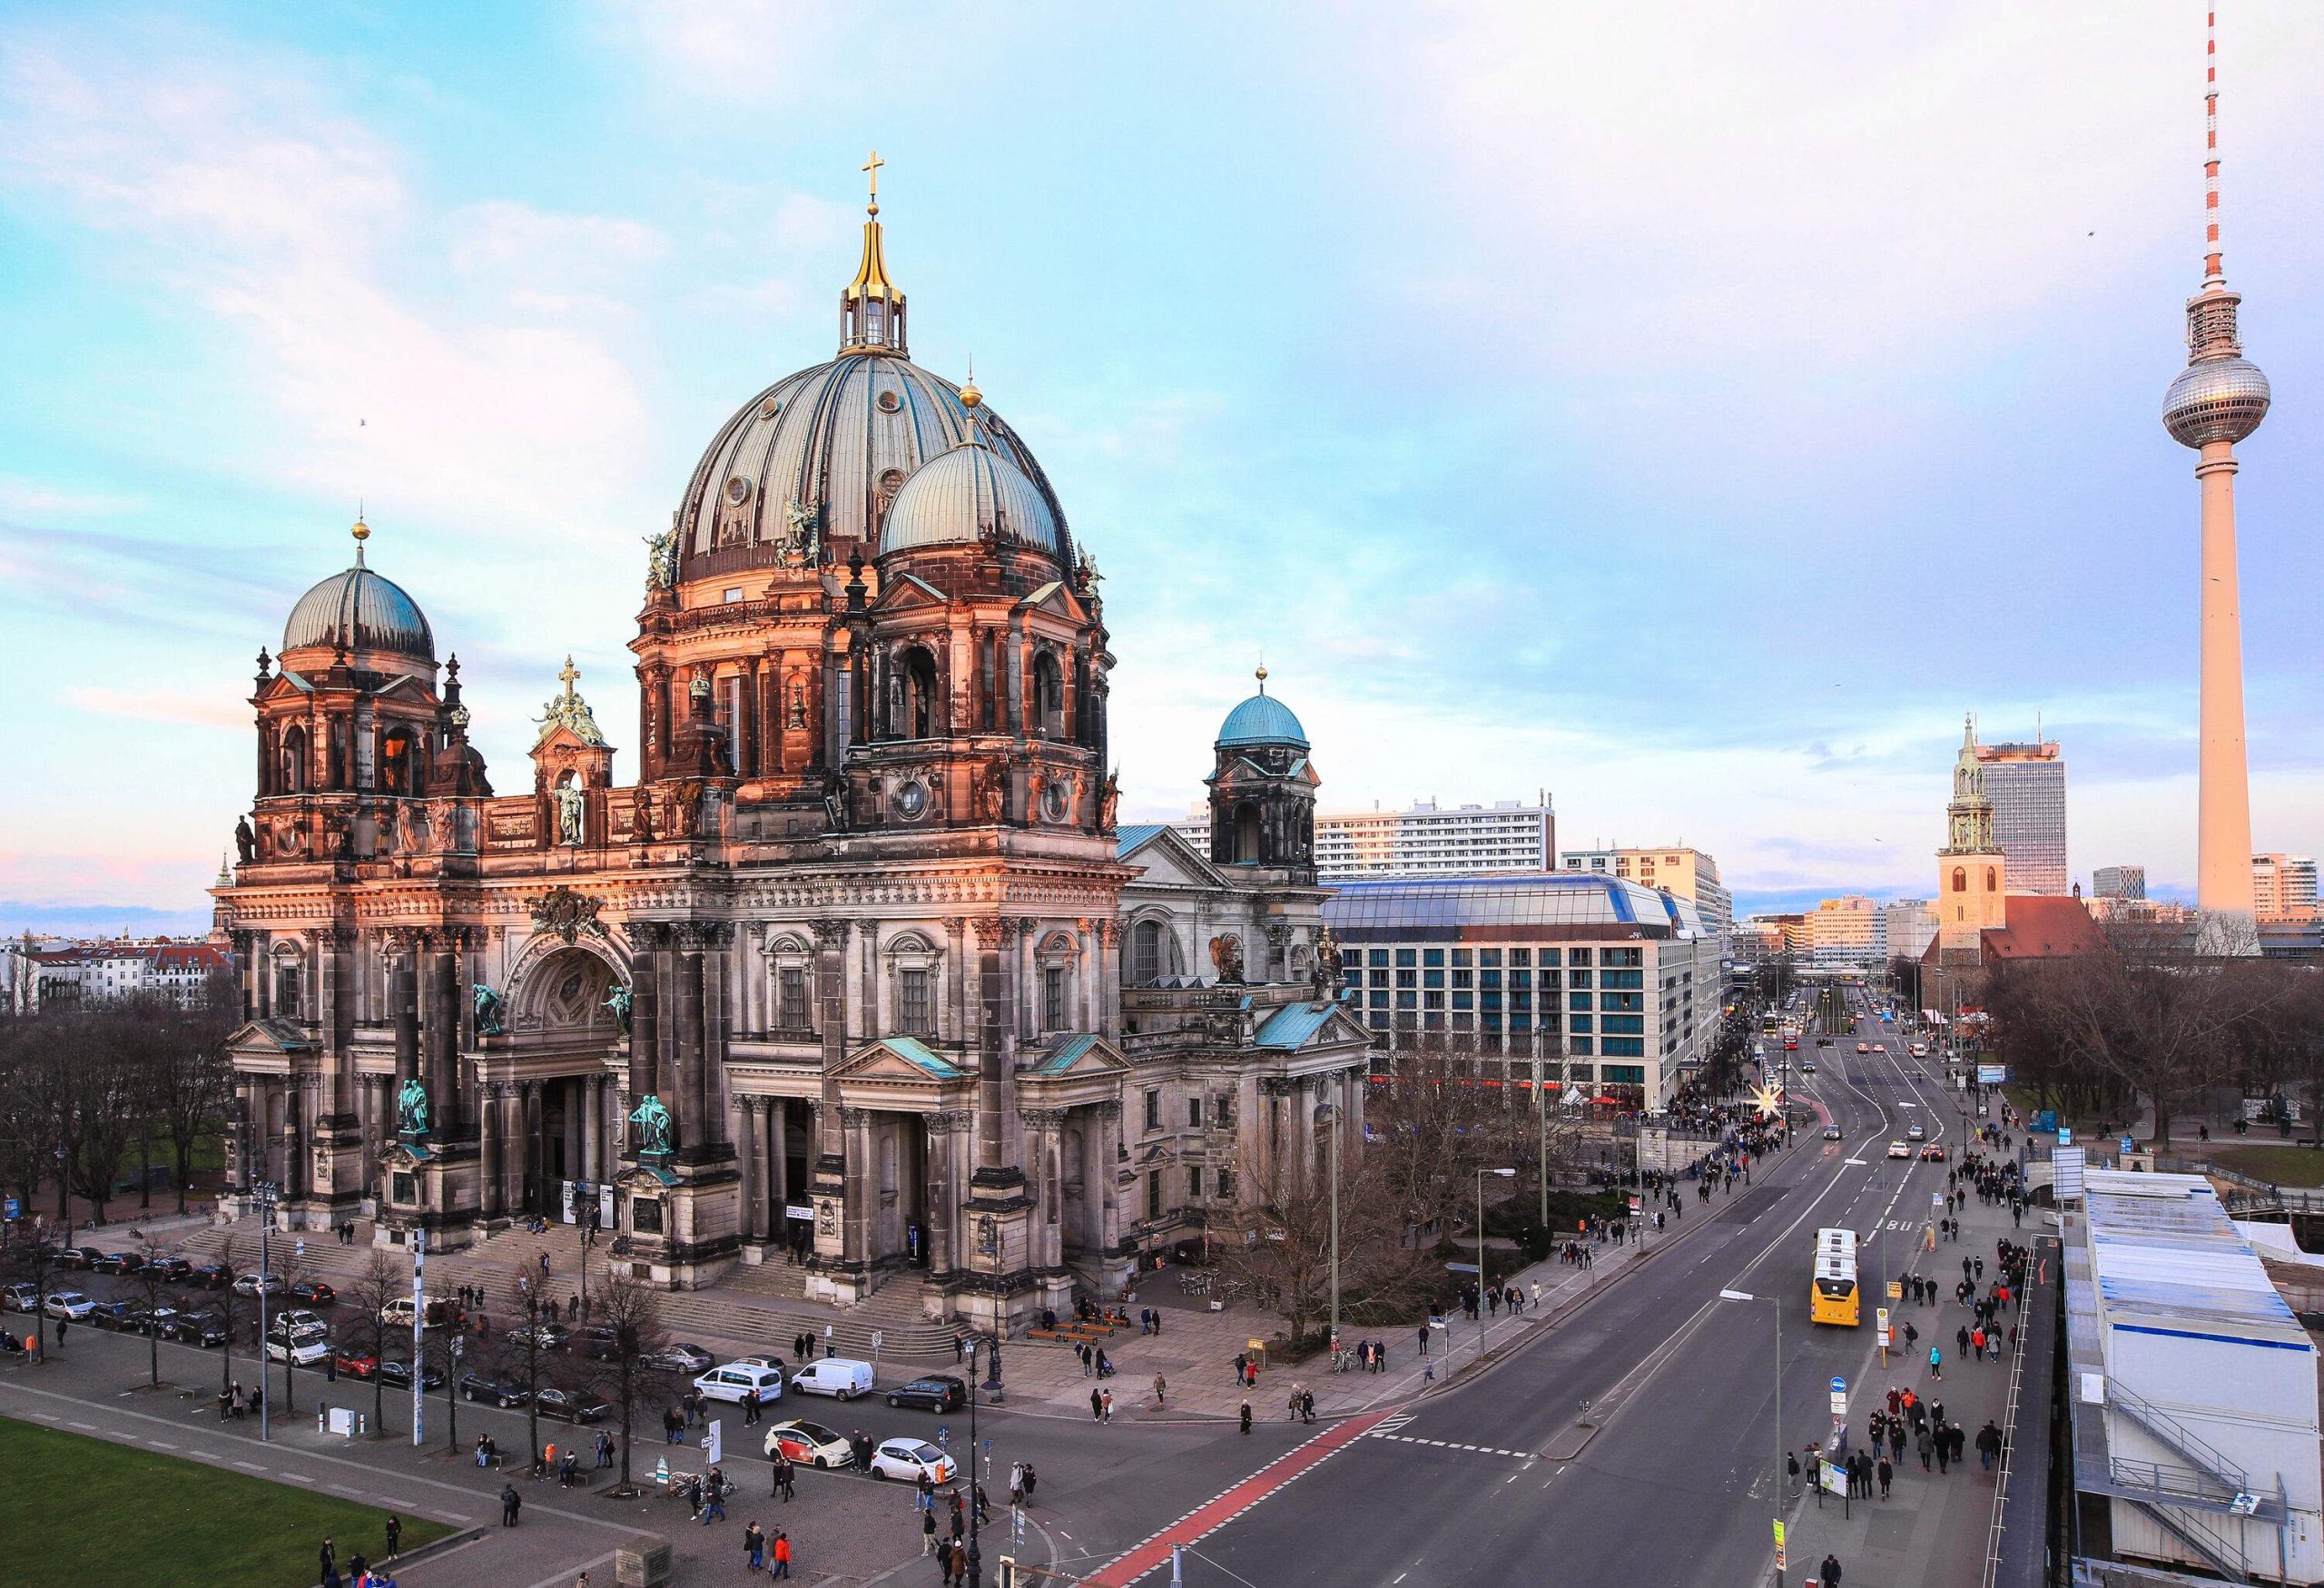 The street in front of the castle-like Berlin Cathedral is bustling with people and cars during the day.